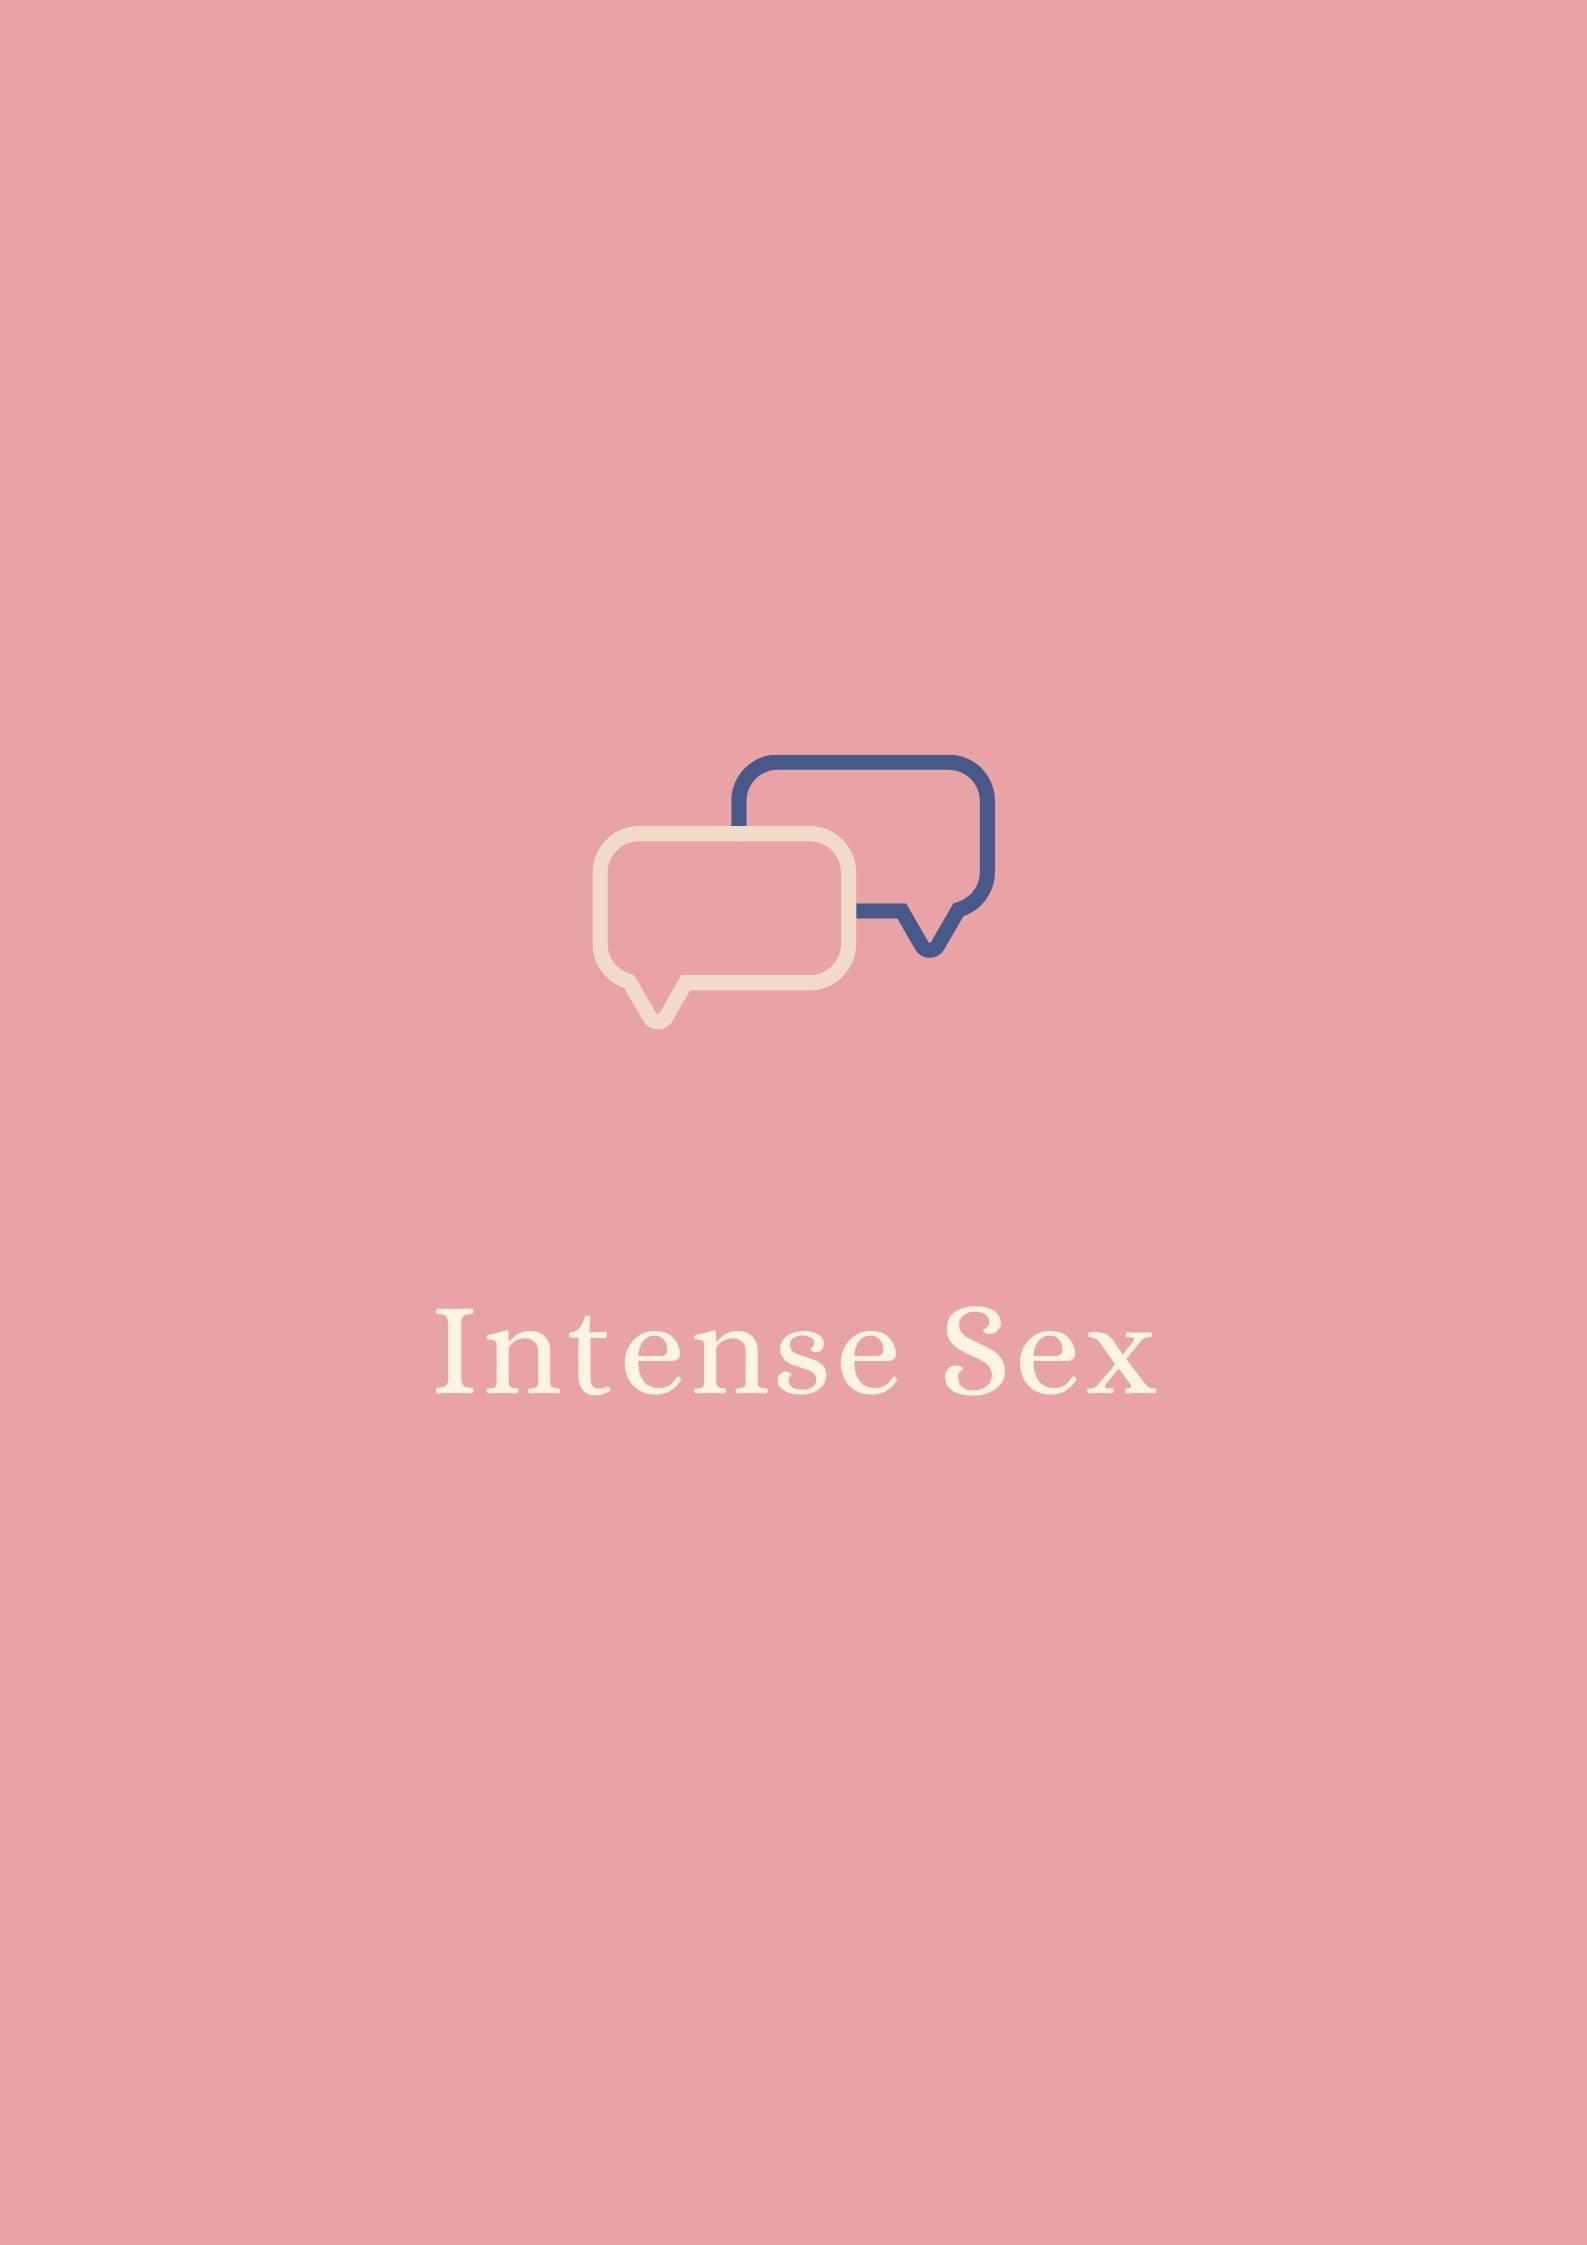 Dirty Talk Phrases To Get You Started: Intense Sex